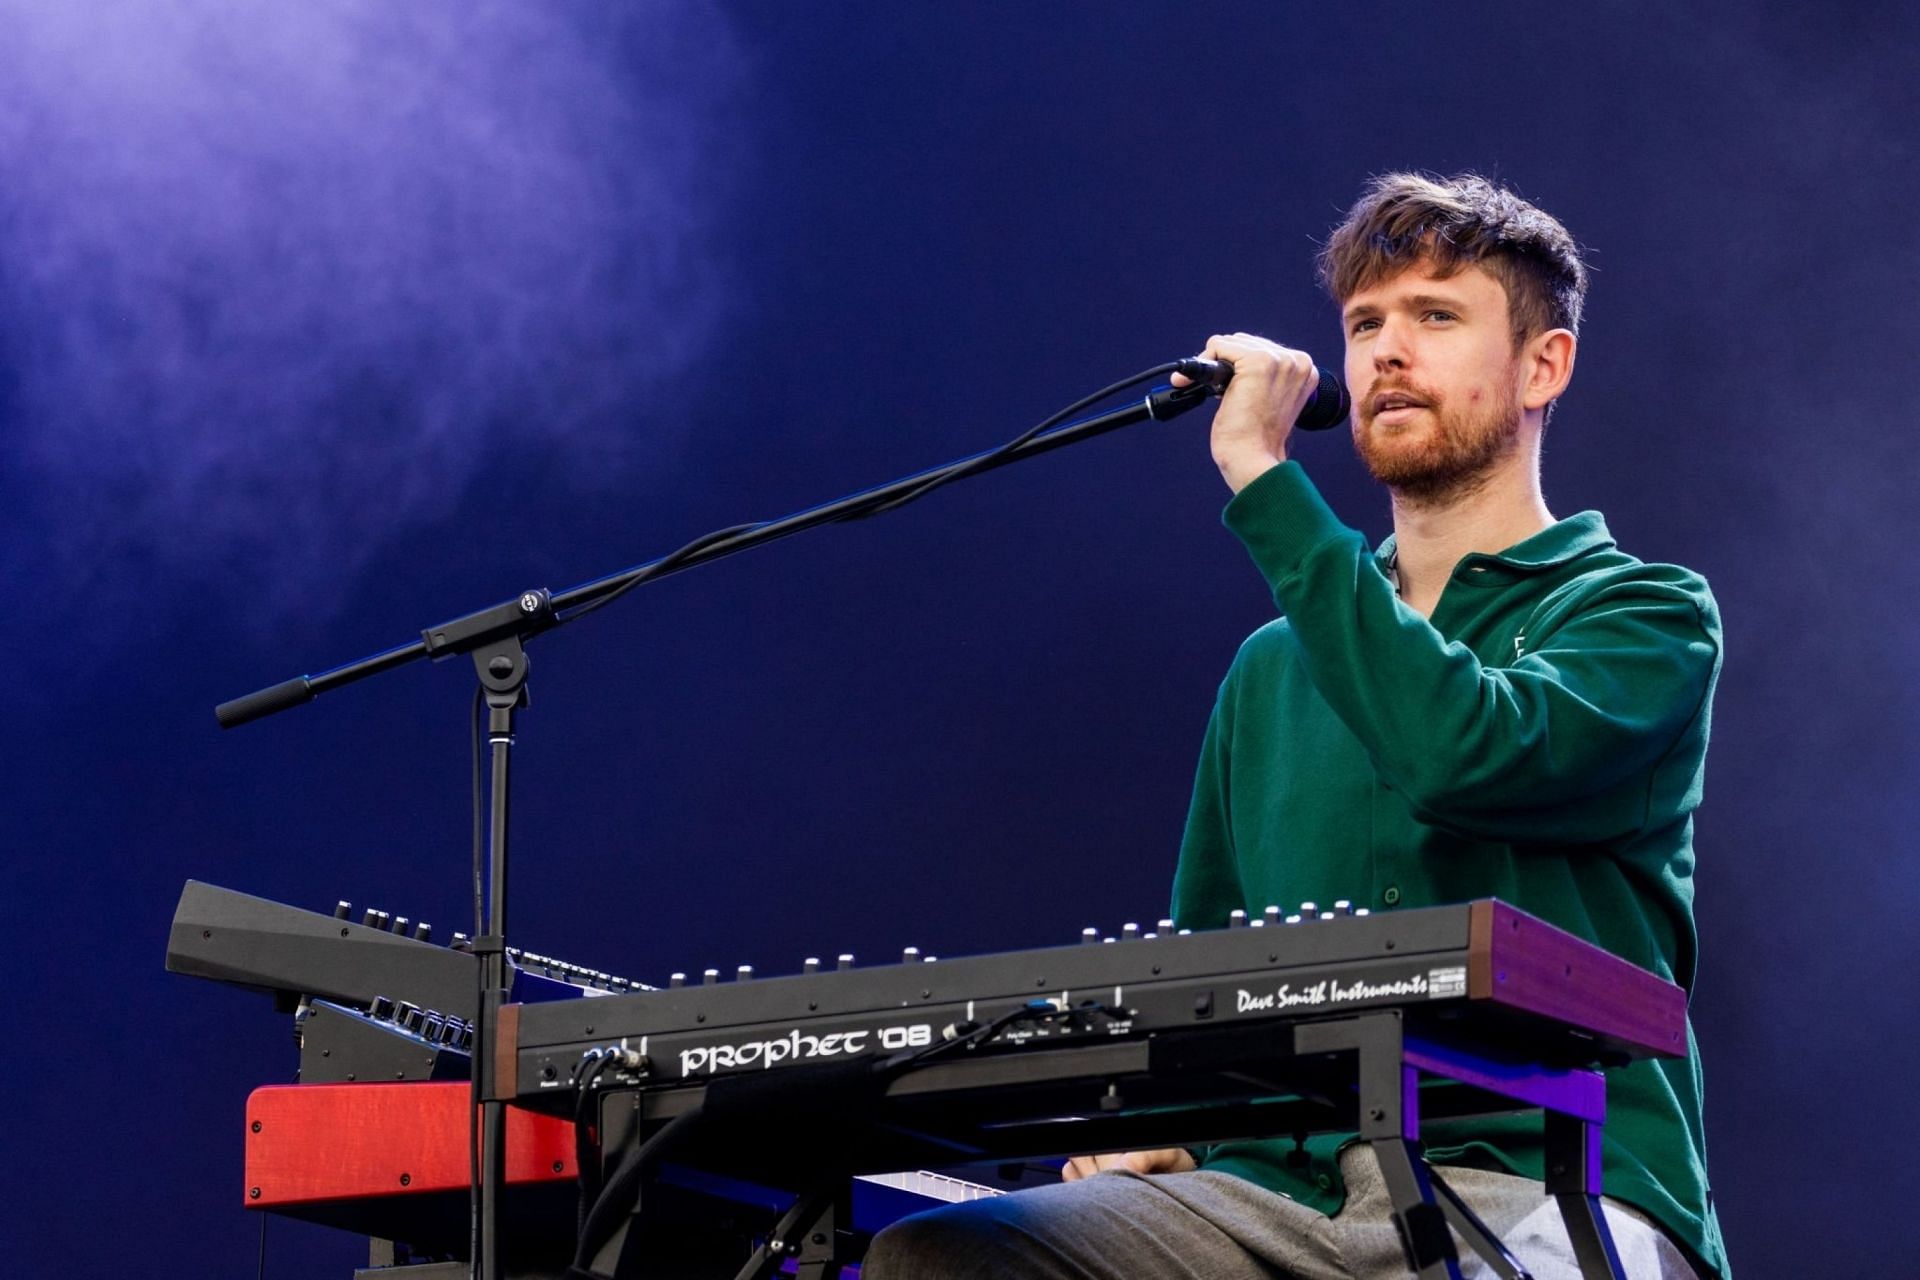 James Blake 2023 tour Tickets, dates, venues, and all you need to know